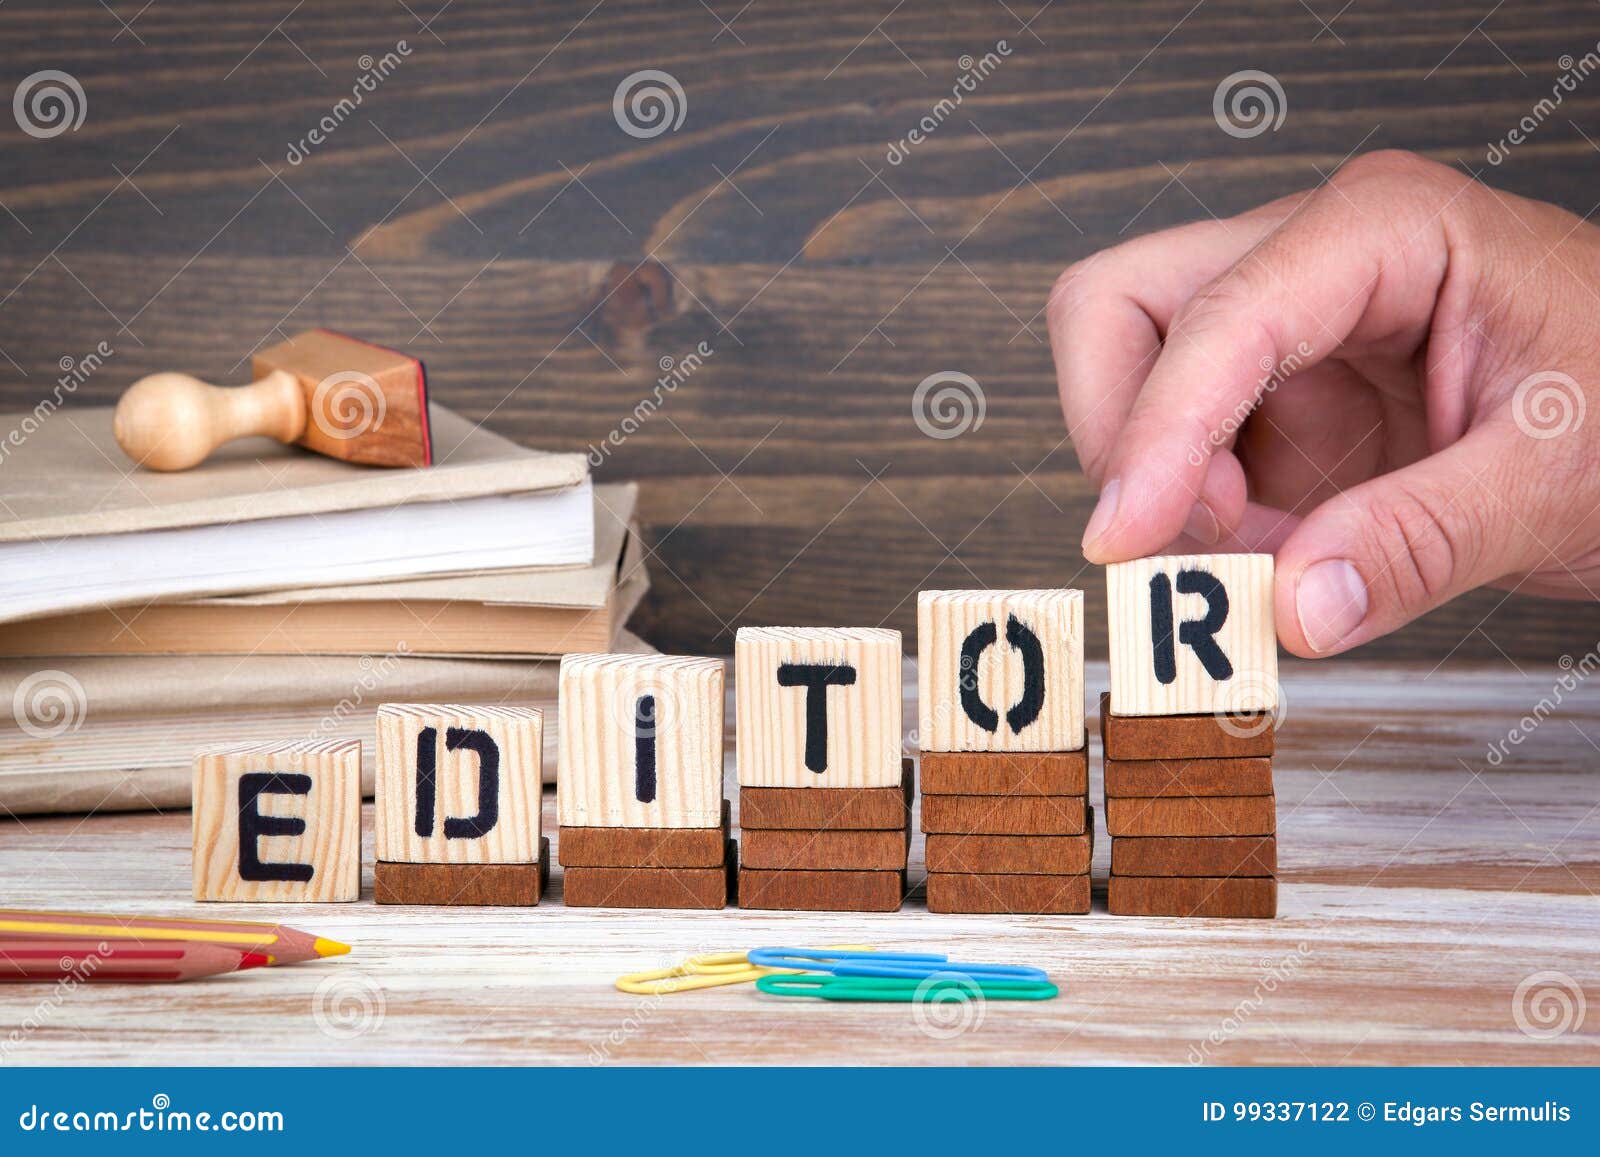 editor concept. wooden letters on the office desk, informative and communication background